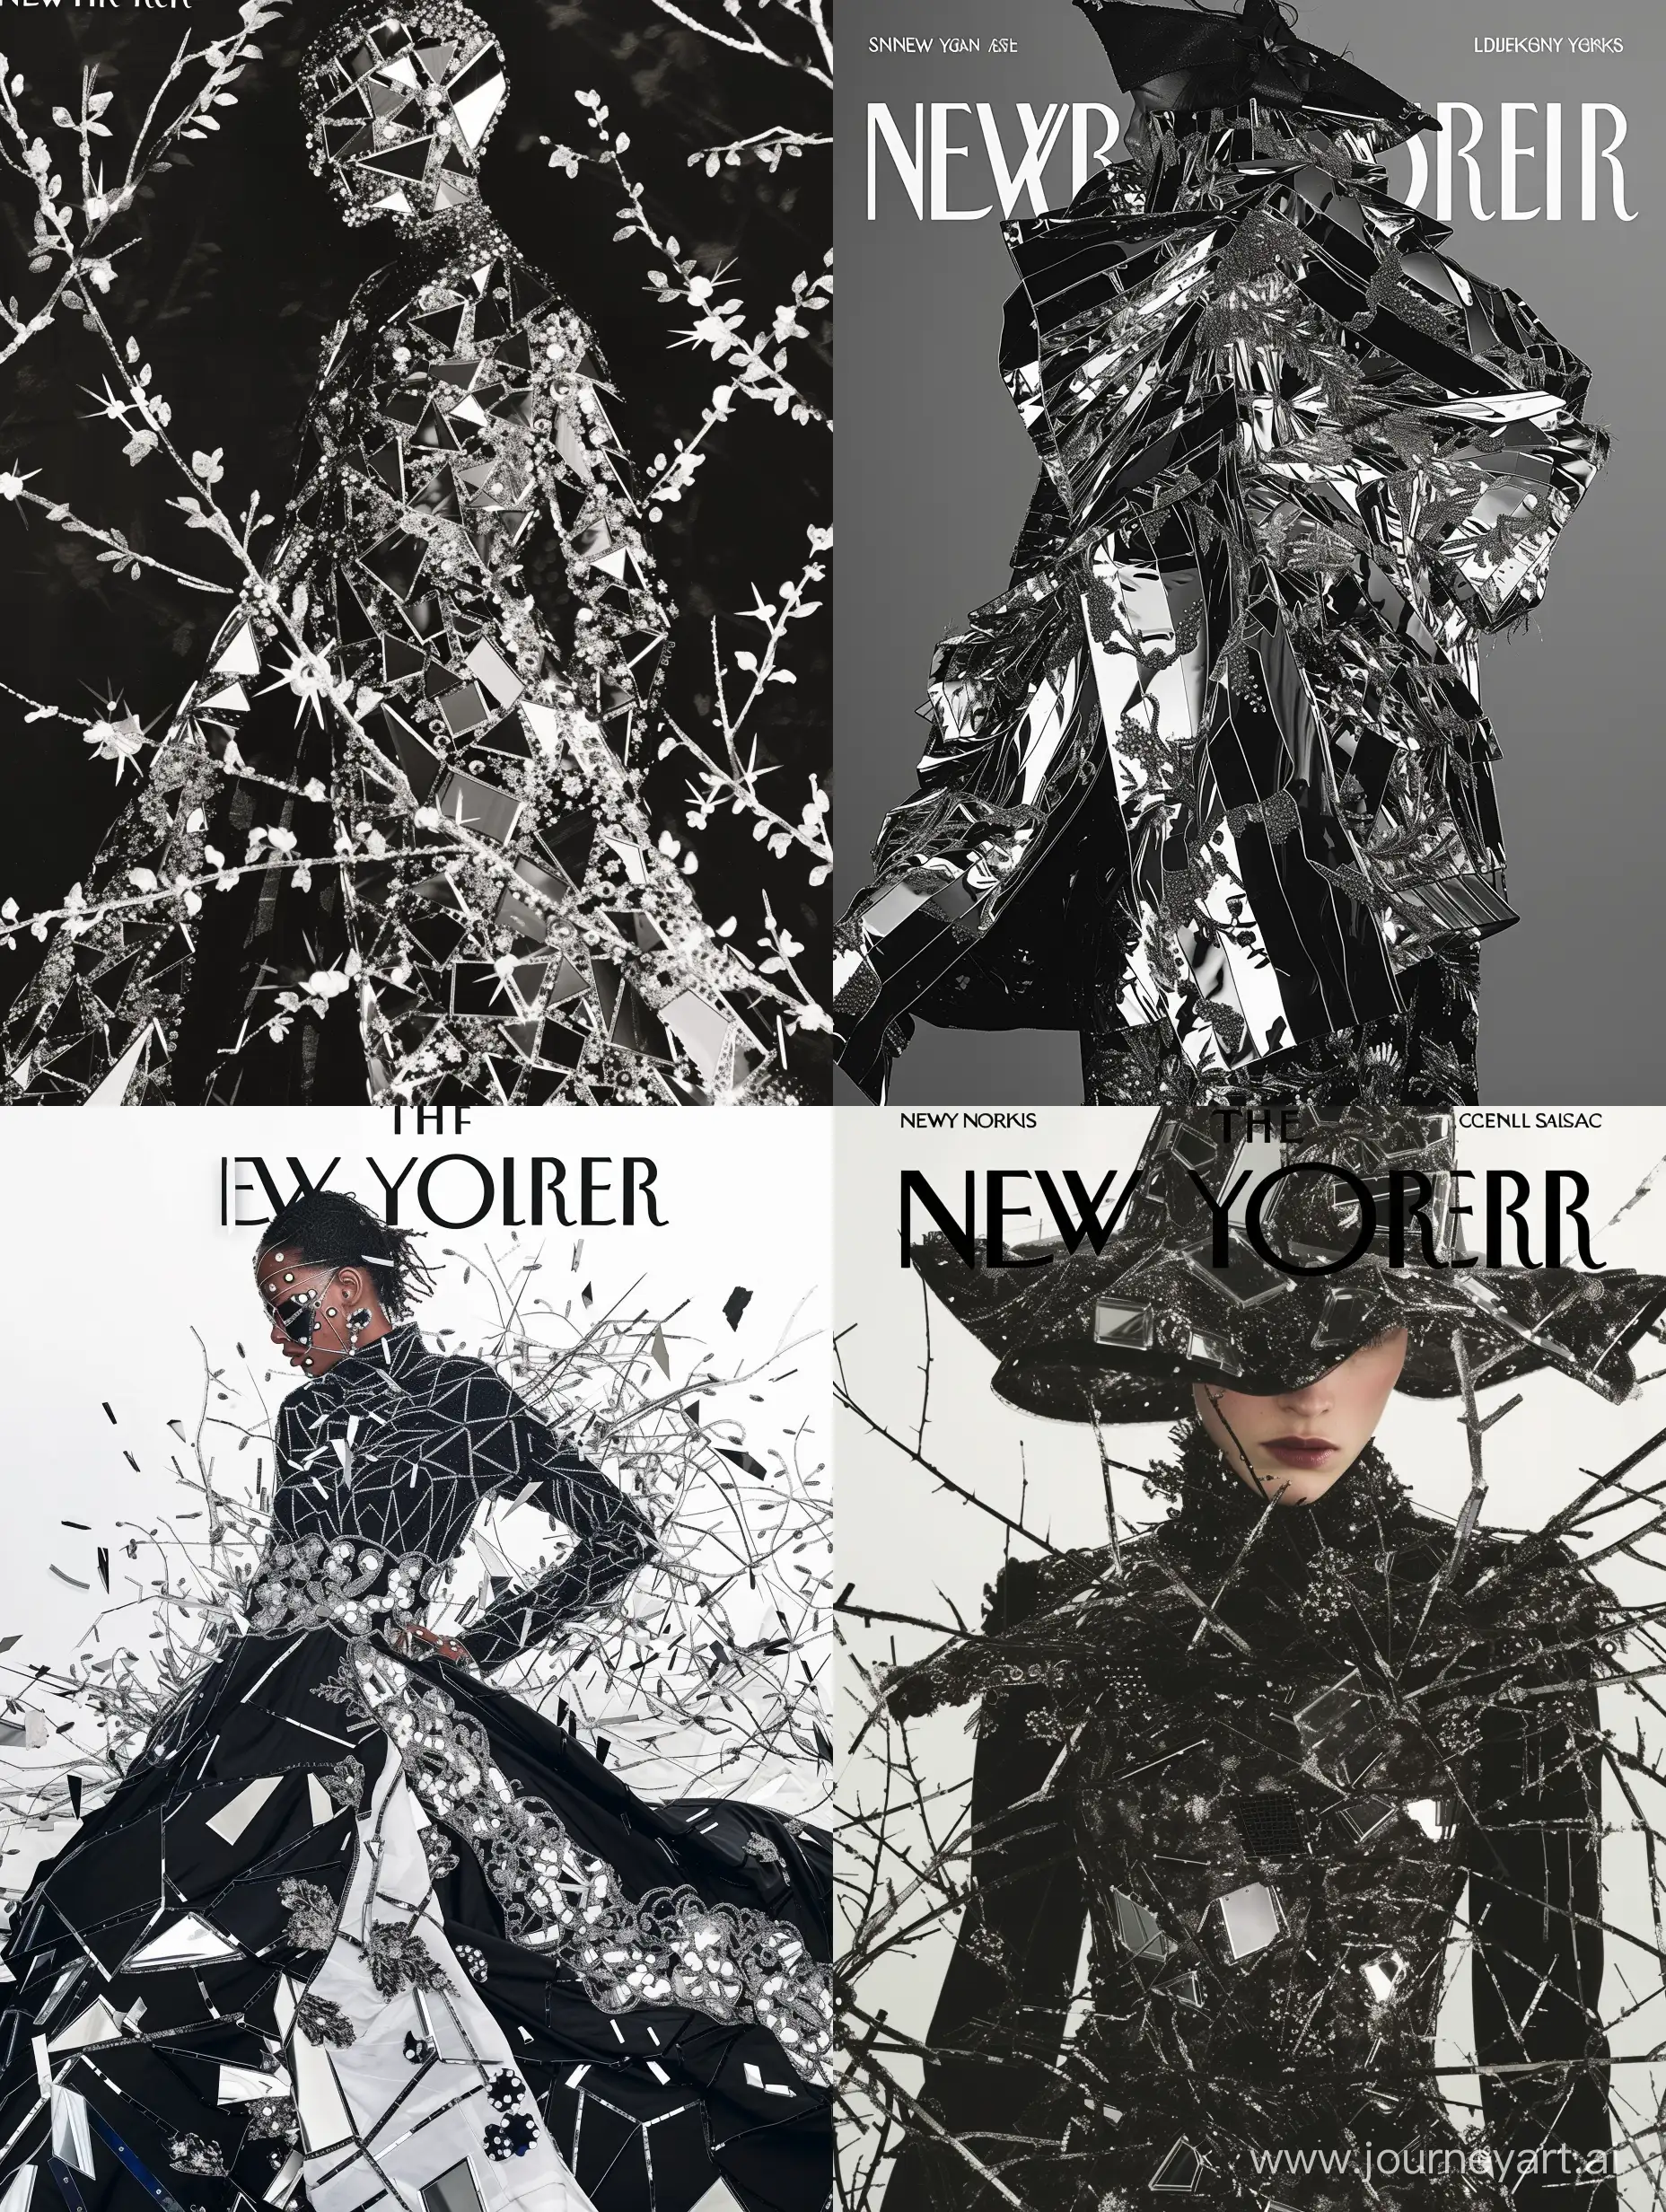 new Yorker magazine cover art style of  surreal matrix vastness  longshot reflective fabric fashion clothes designs overwrought perfect flawless layered cinematic lighting detailed textures natural fabrics unique styles made with mirror pieces and embroidered silk black and white reflective